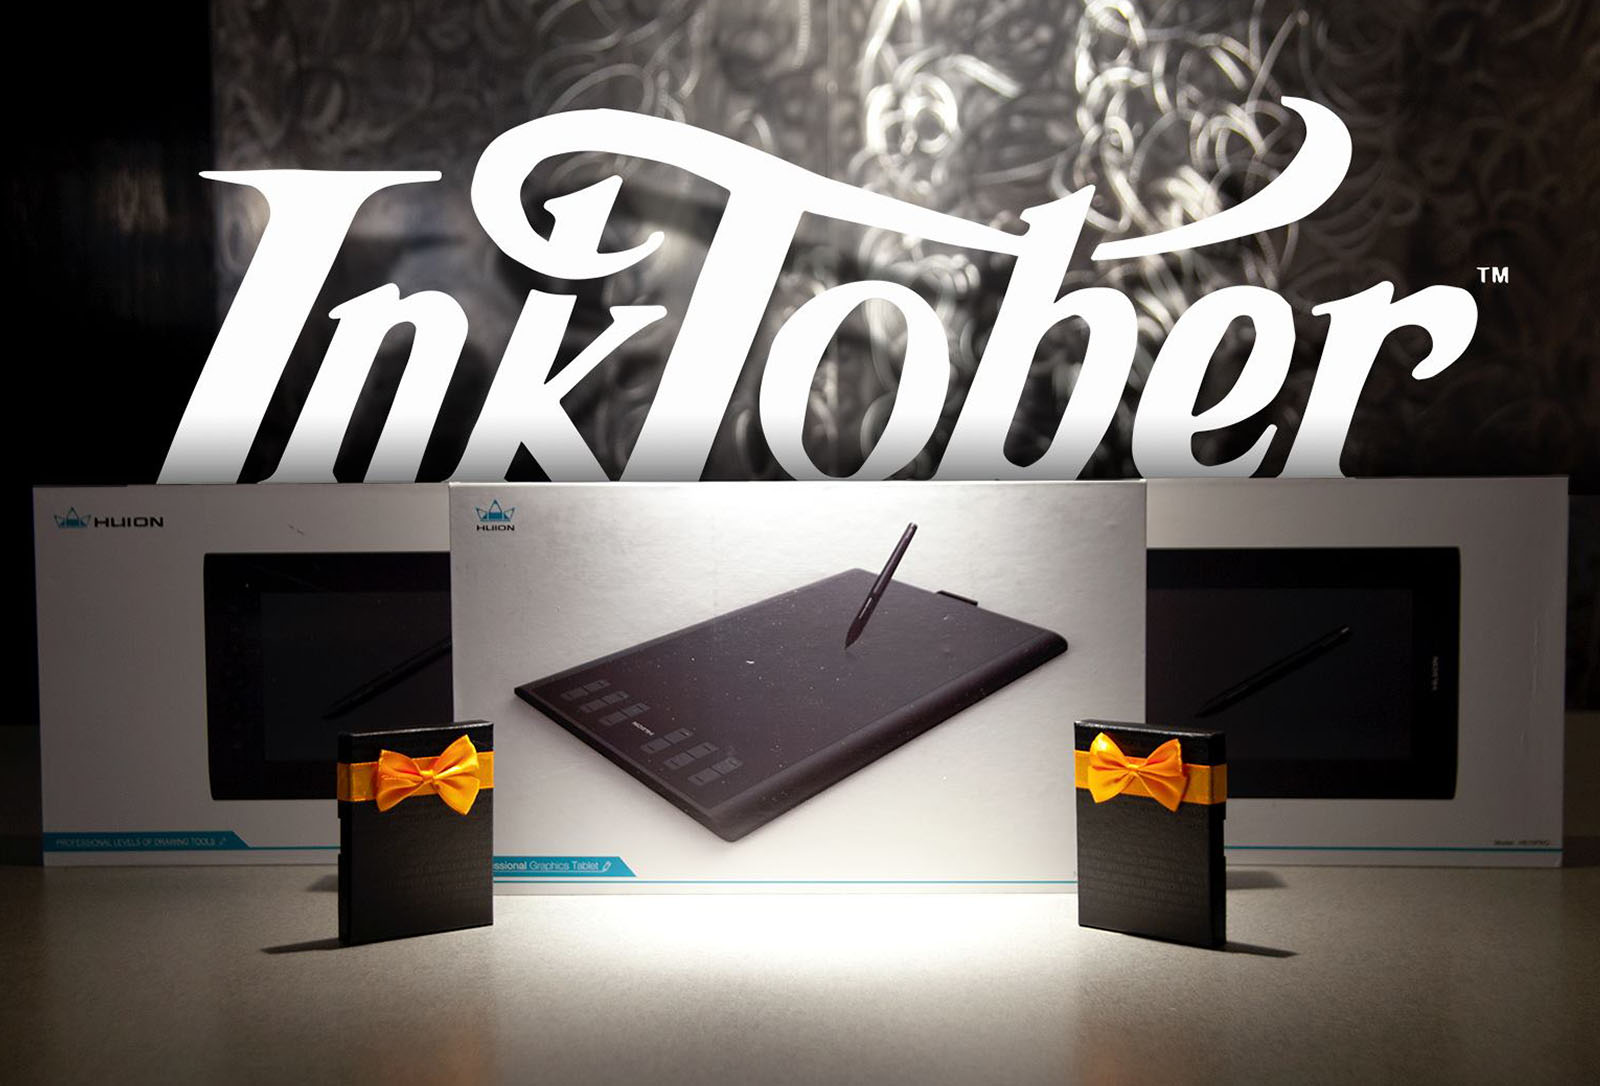 Inktober prizes for students including drawing tablets